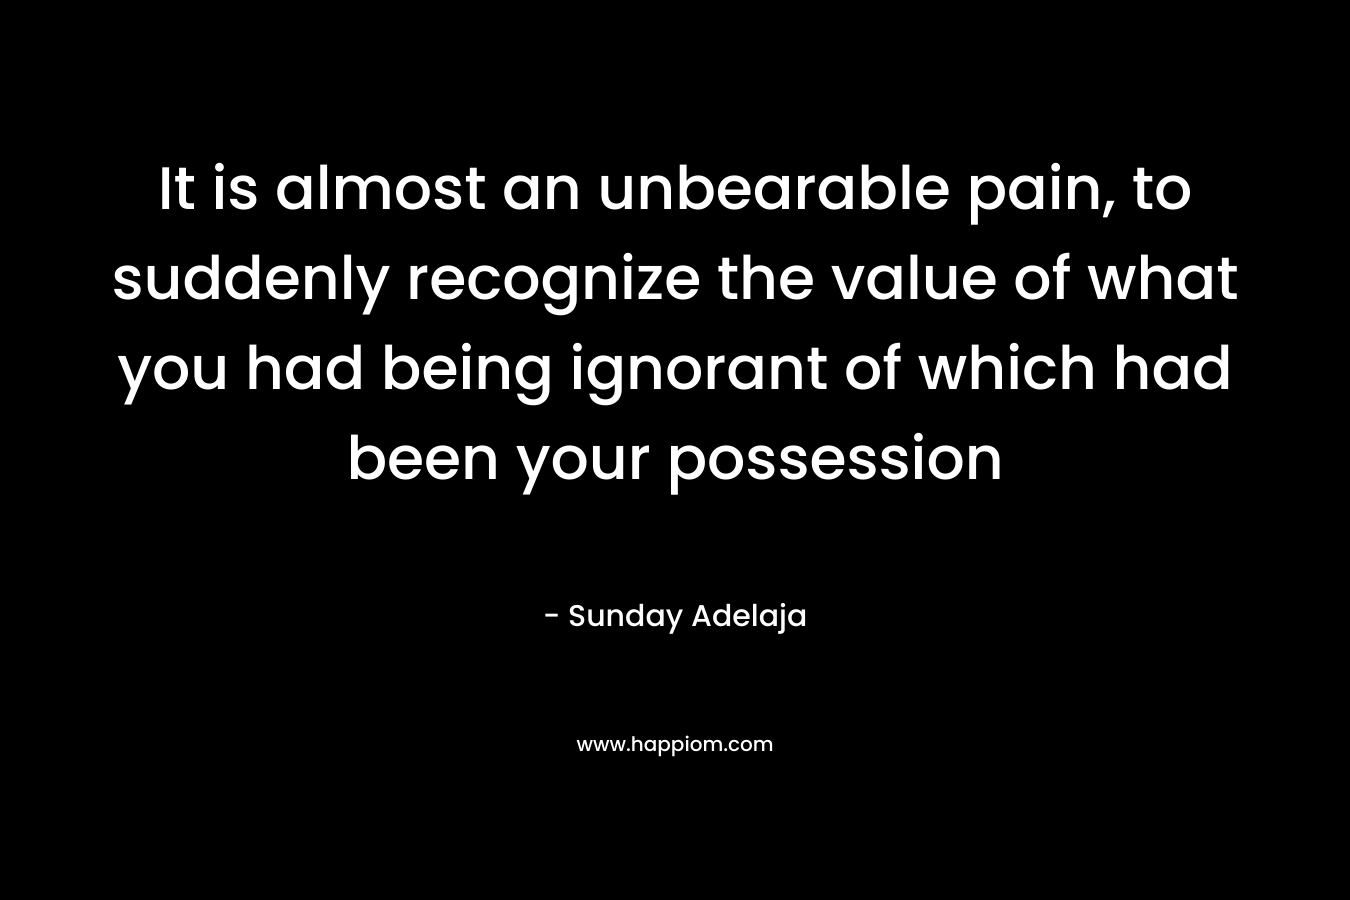 It is almost an unbearable pain, to suddenly recognize the value of what you had being ignorant of which had been your possession